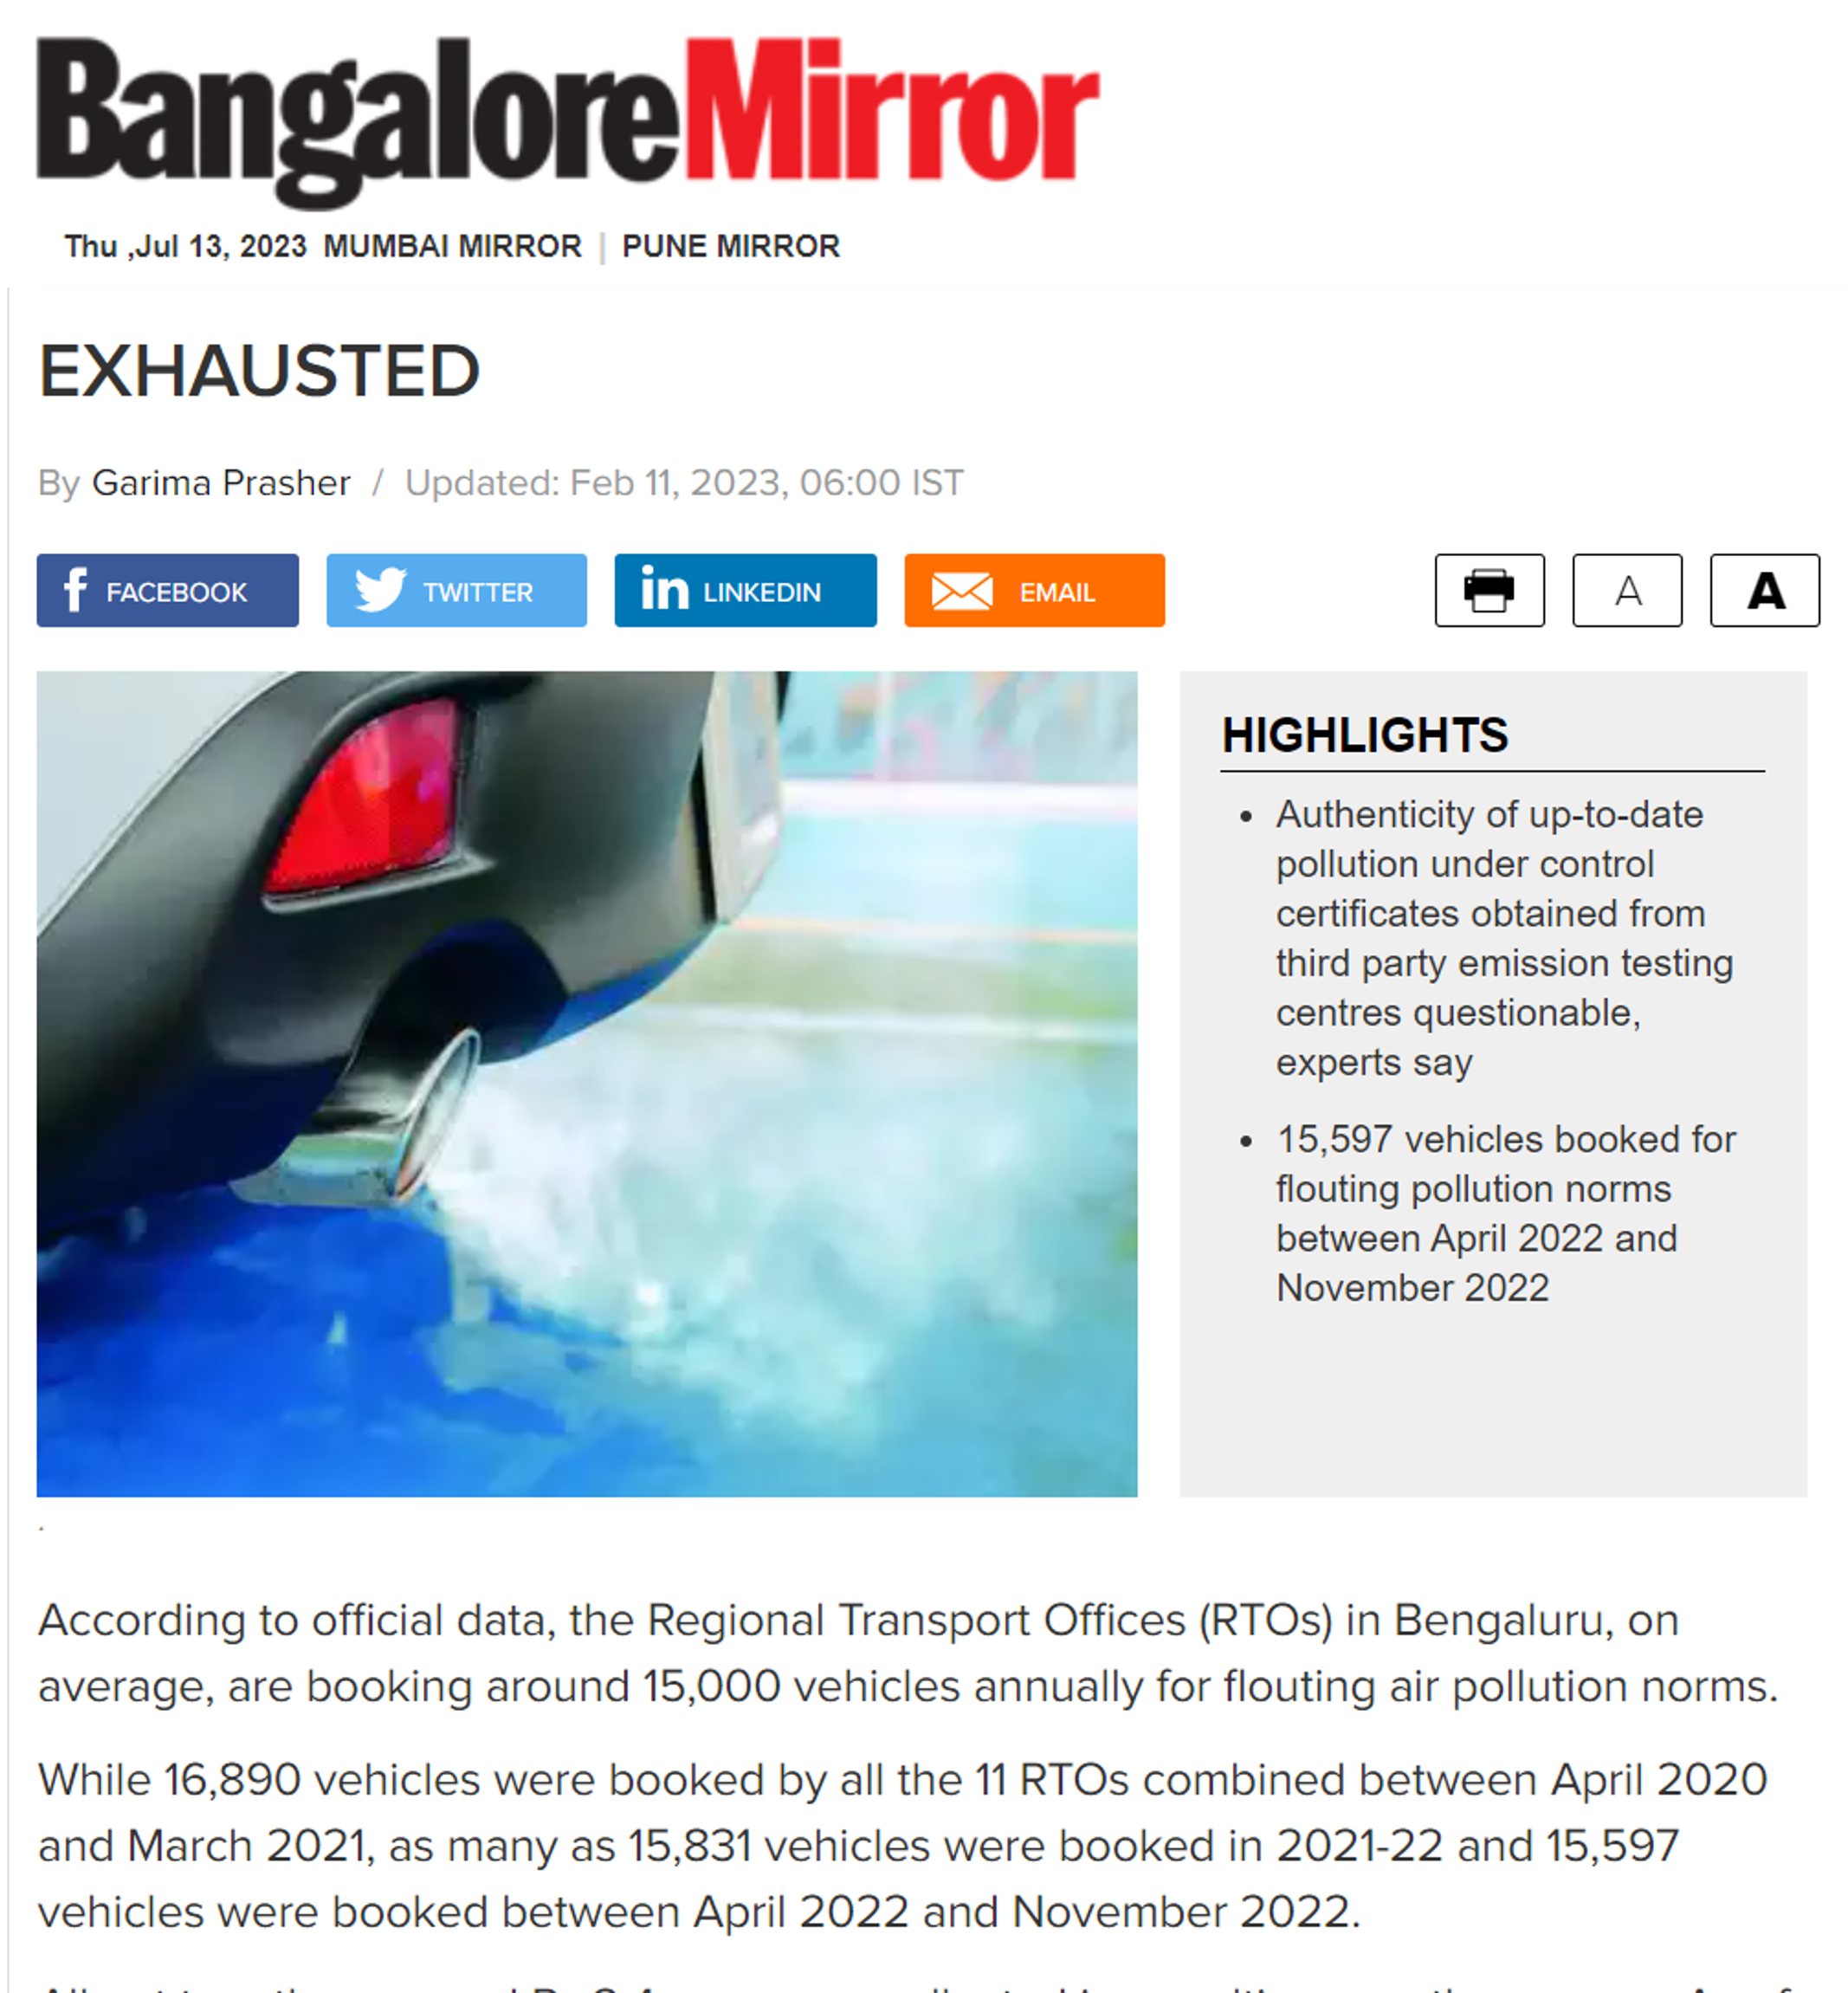 Dr Pratima Singh quoted by Bangalore Mirror on the issues with Pollution Under Control certificates